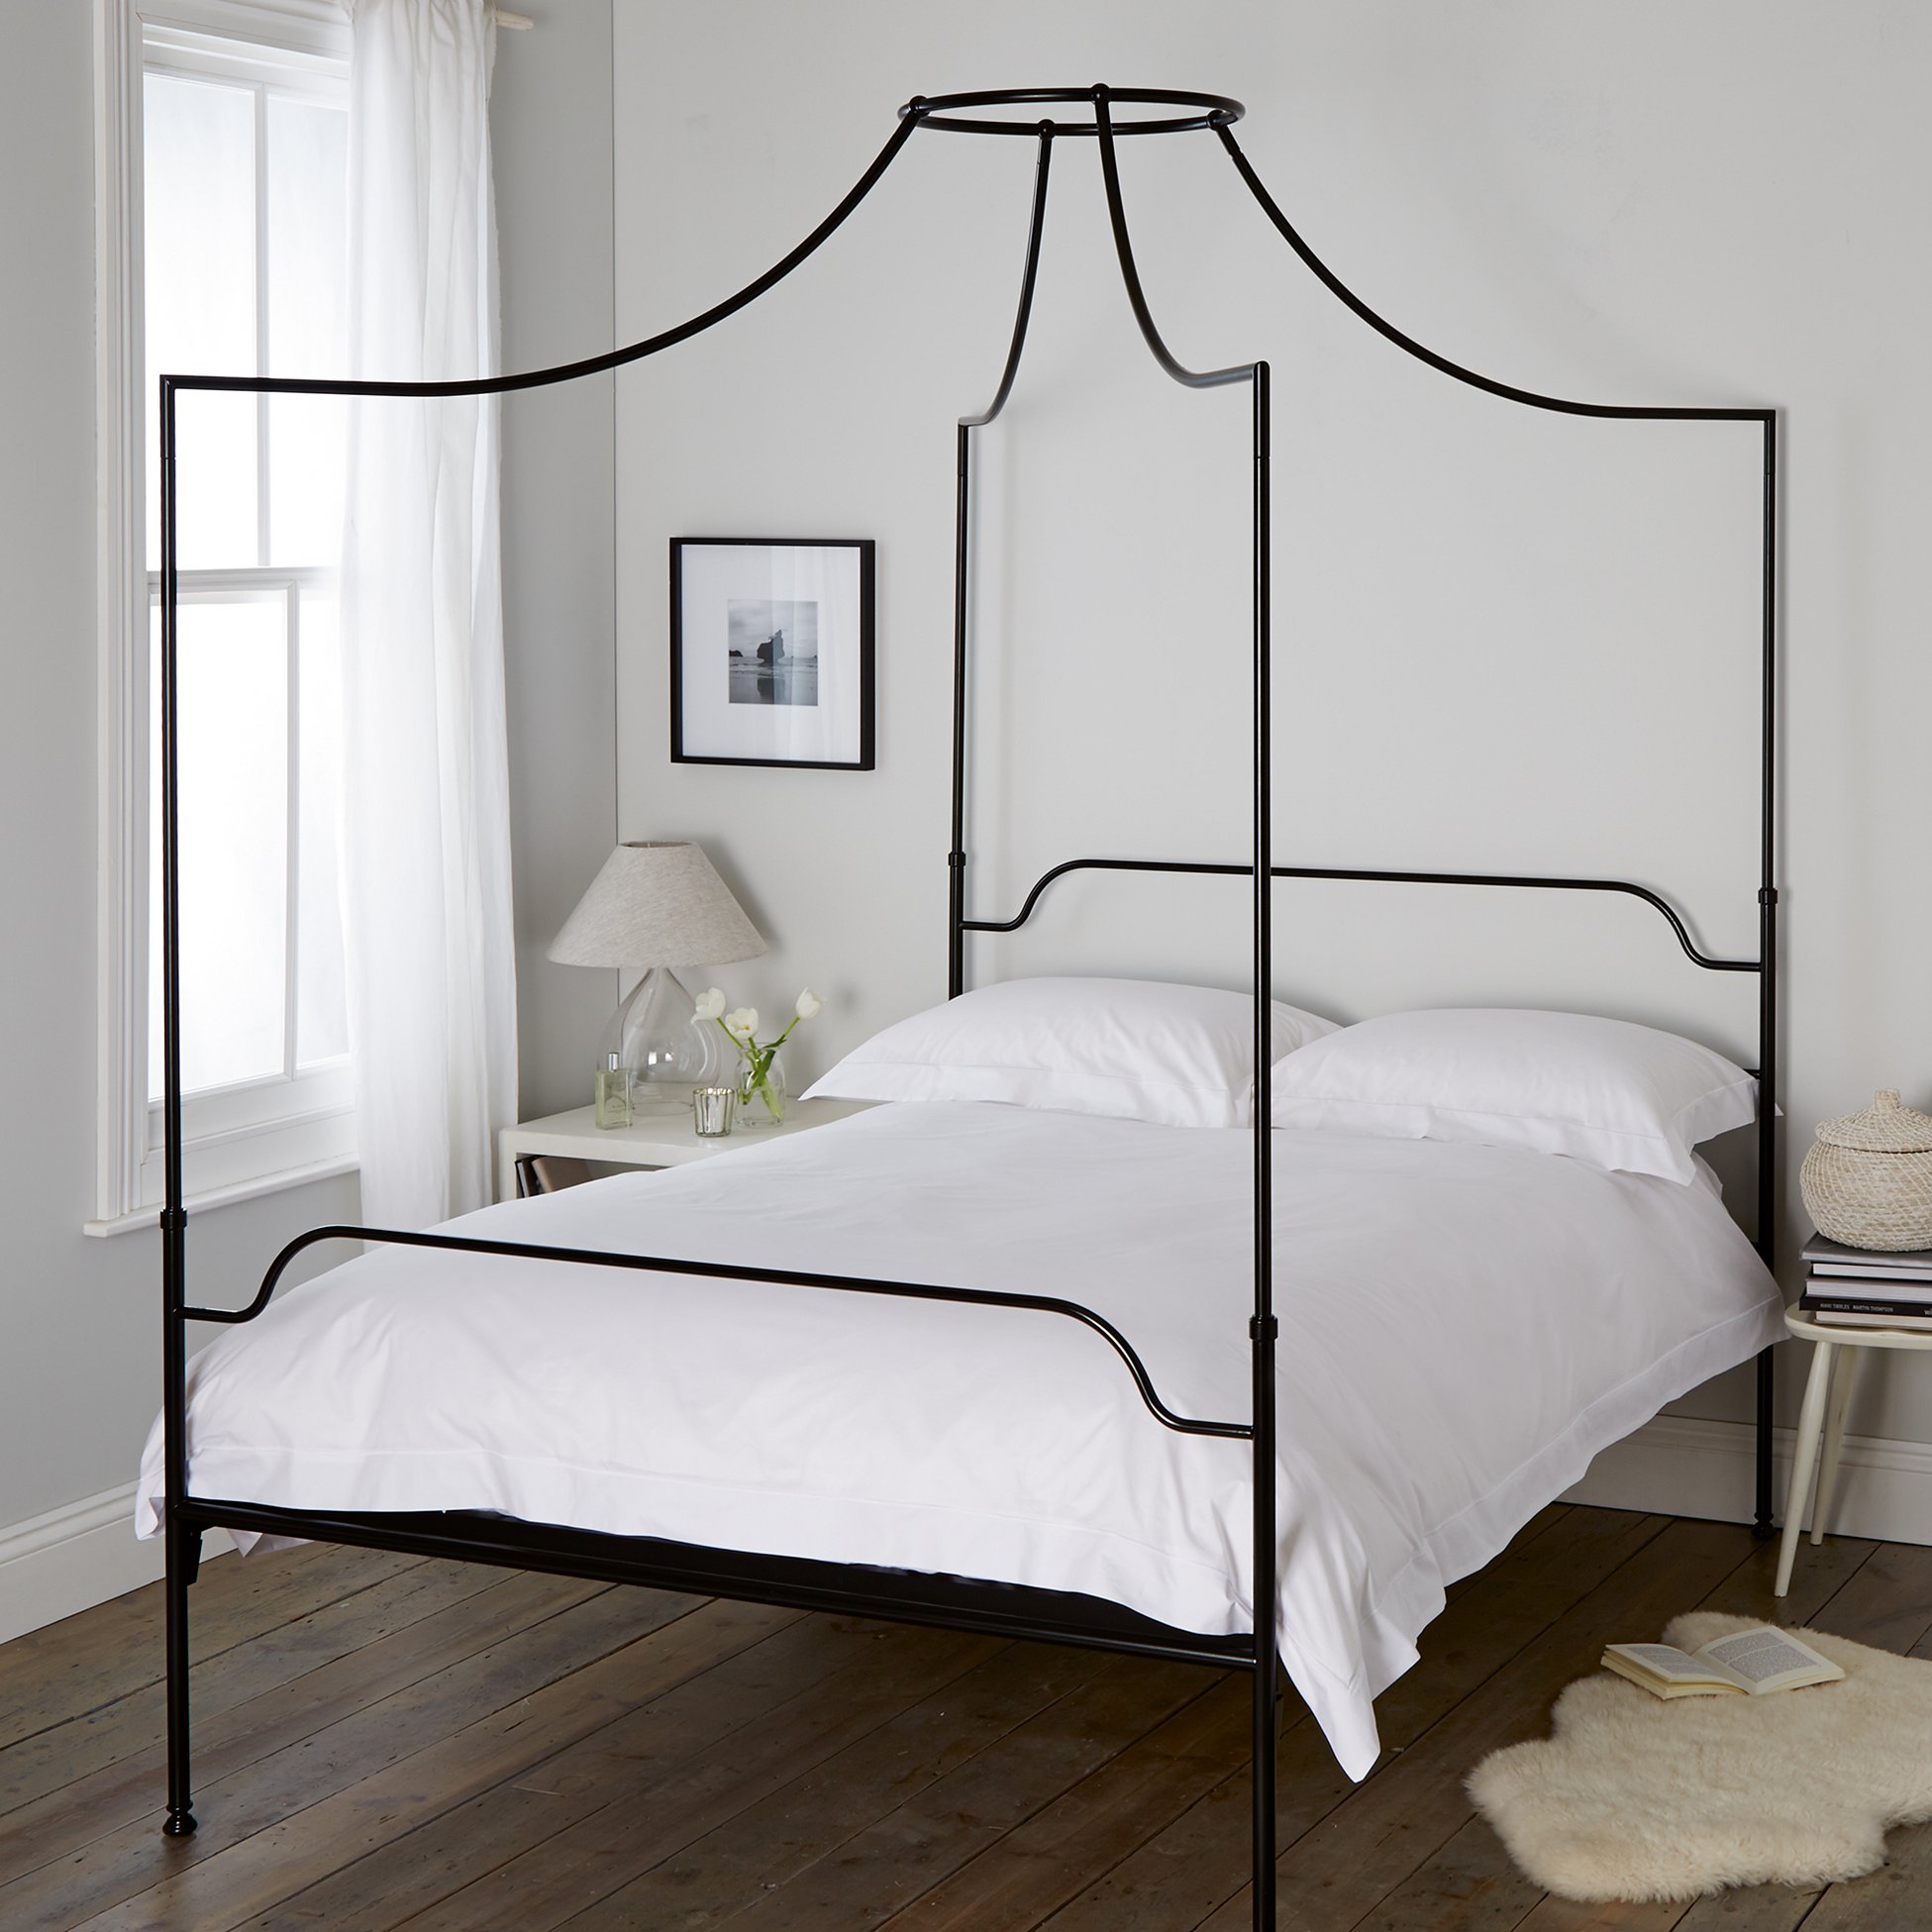 Beaumont Four Poster Bed Beds The, King Size Four Poster Iron Canopy Bed In Black